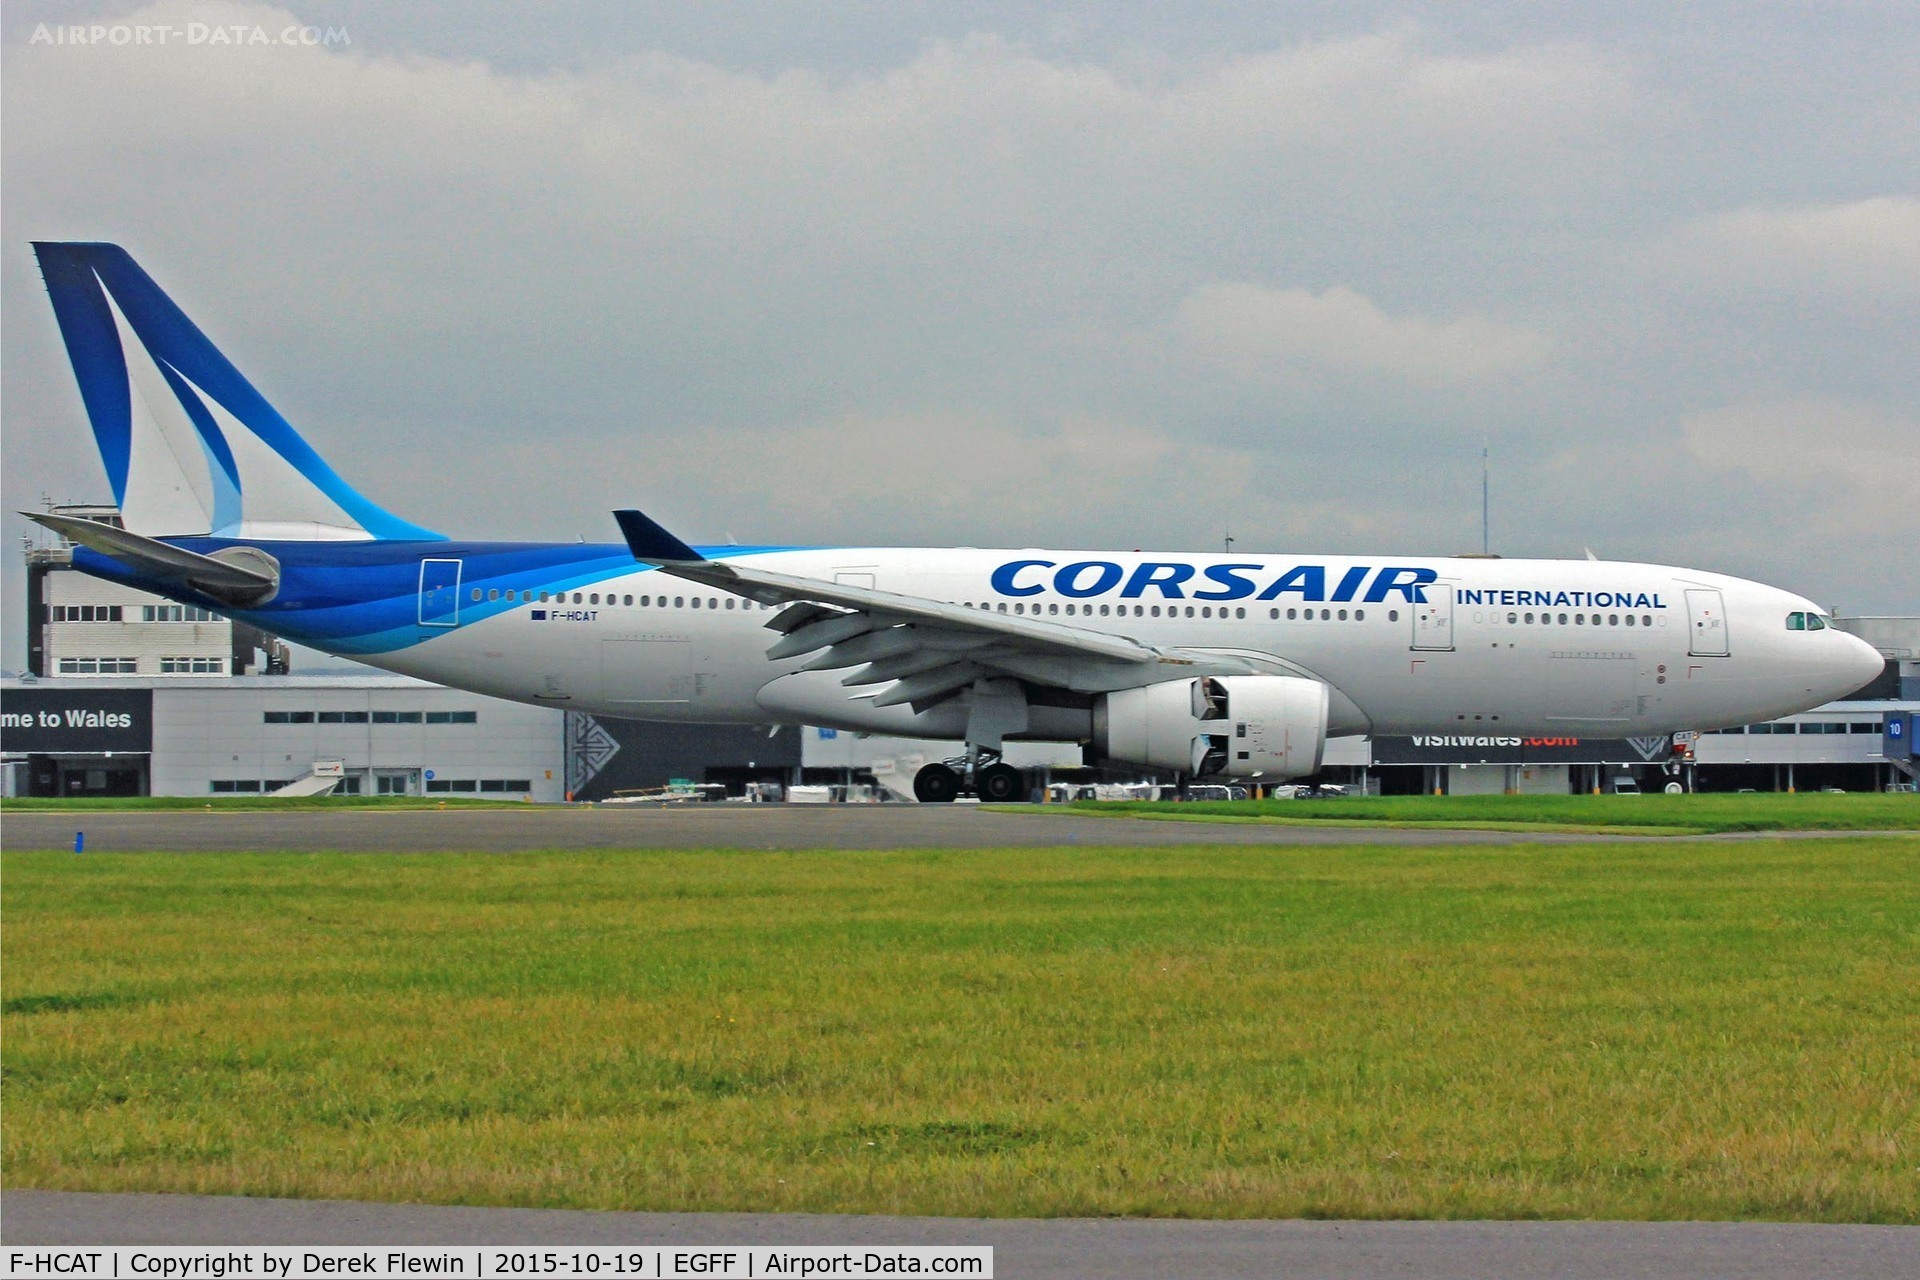 F-HCAT, 1999 Airbus A330-243 C/N 285, A330-243, Paris Orly based, call sign Corsair 20, previously F_WWKB, landing on runway 12, out of Paris Orly.